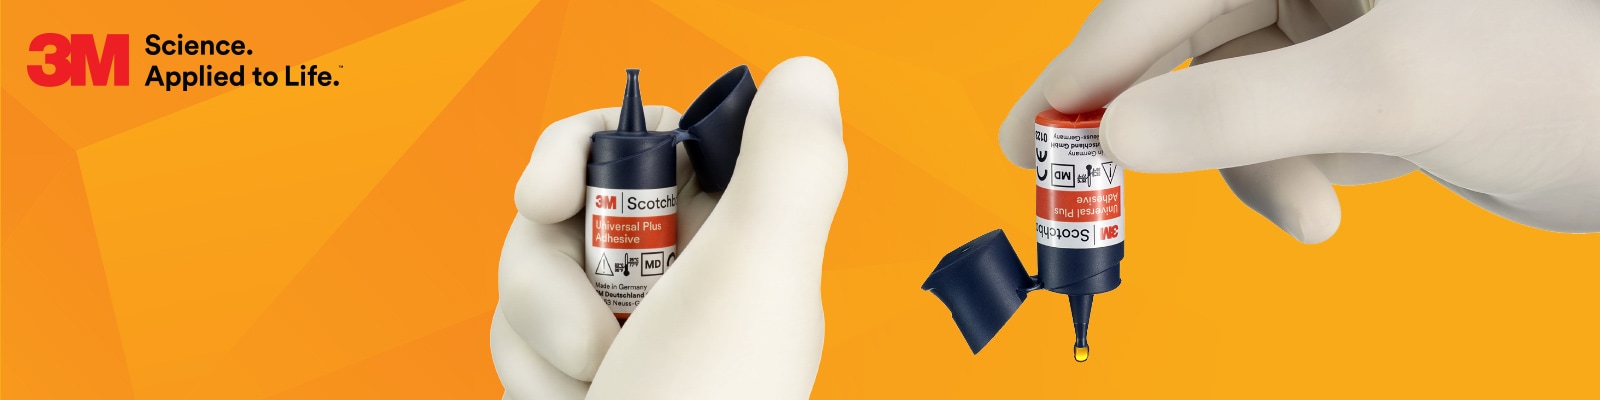 Direct and Indirect Restorations Just Got Easier with 3M™ Scotchbond™ Universal Plus Adhesive